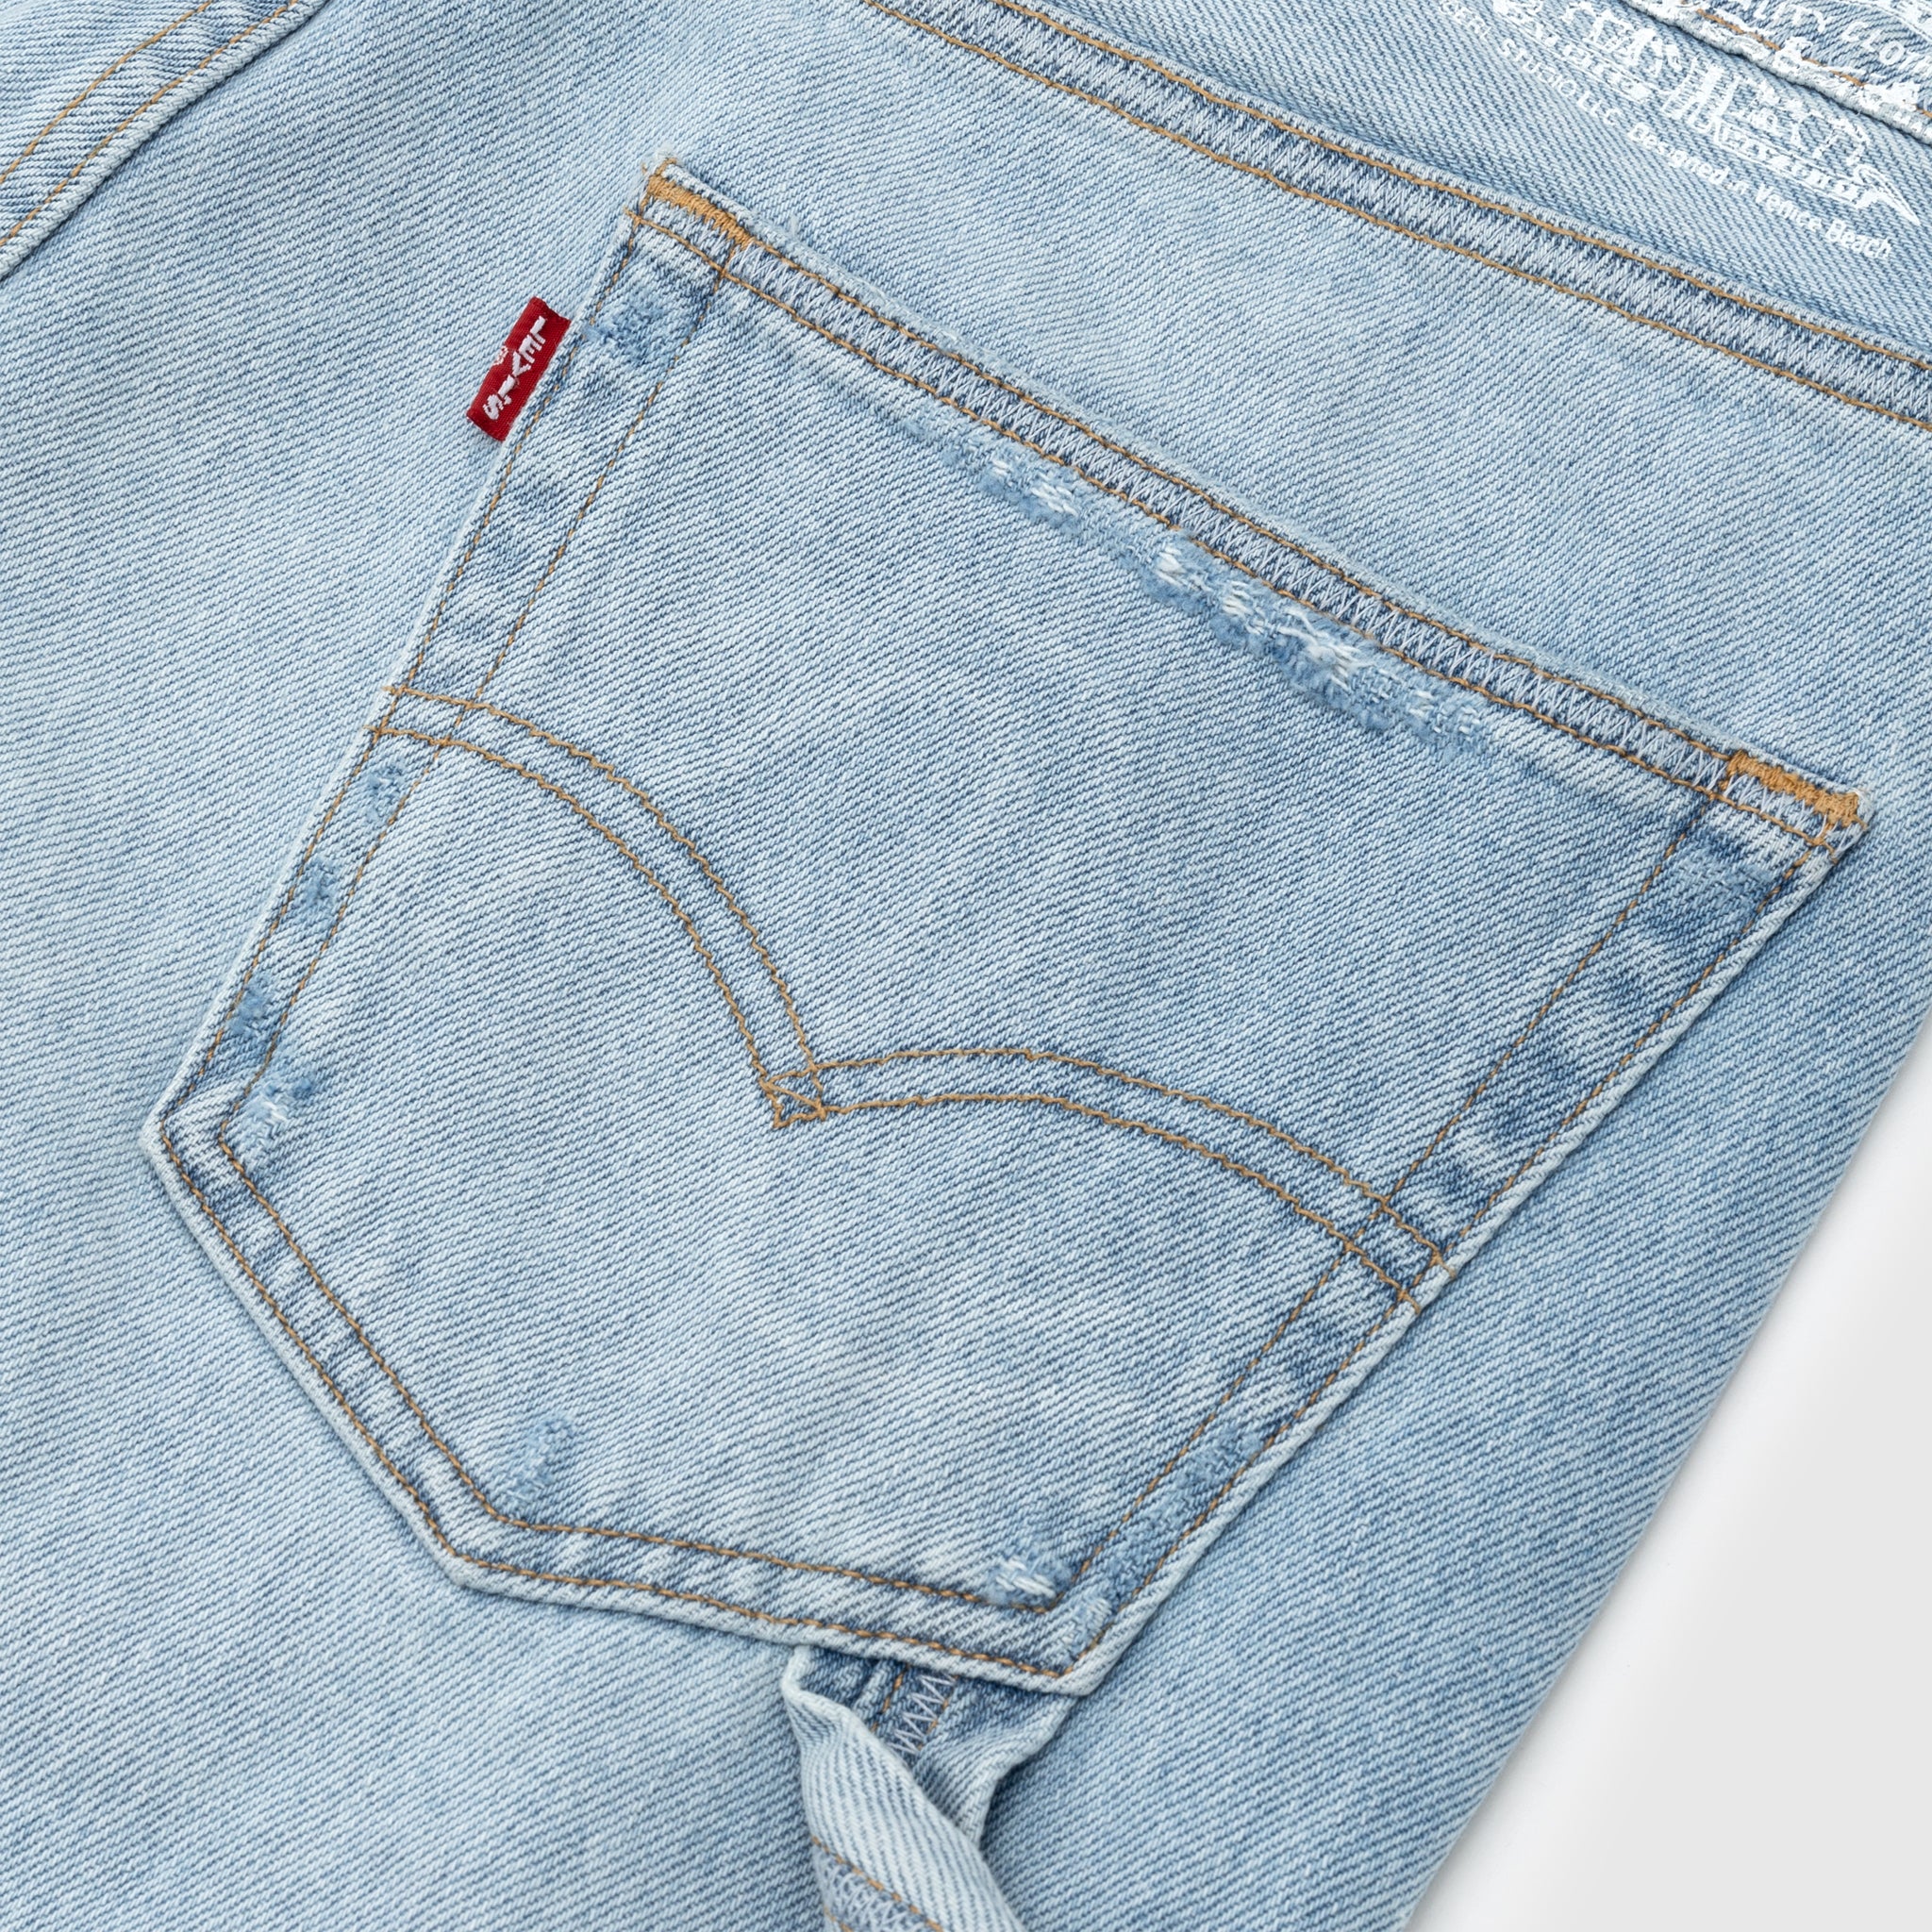 X LEVIS® STAY LOOSE JEANS